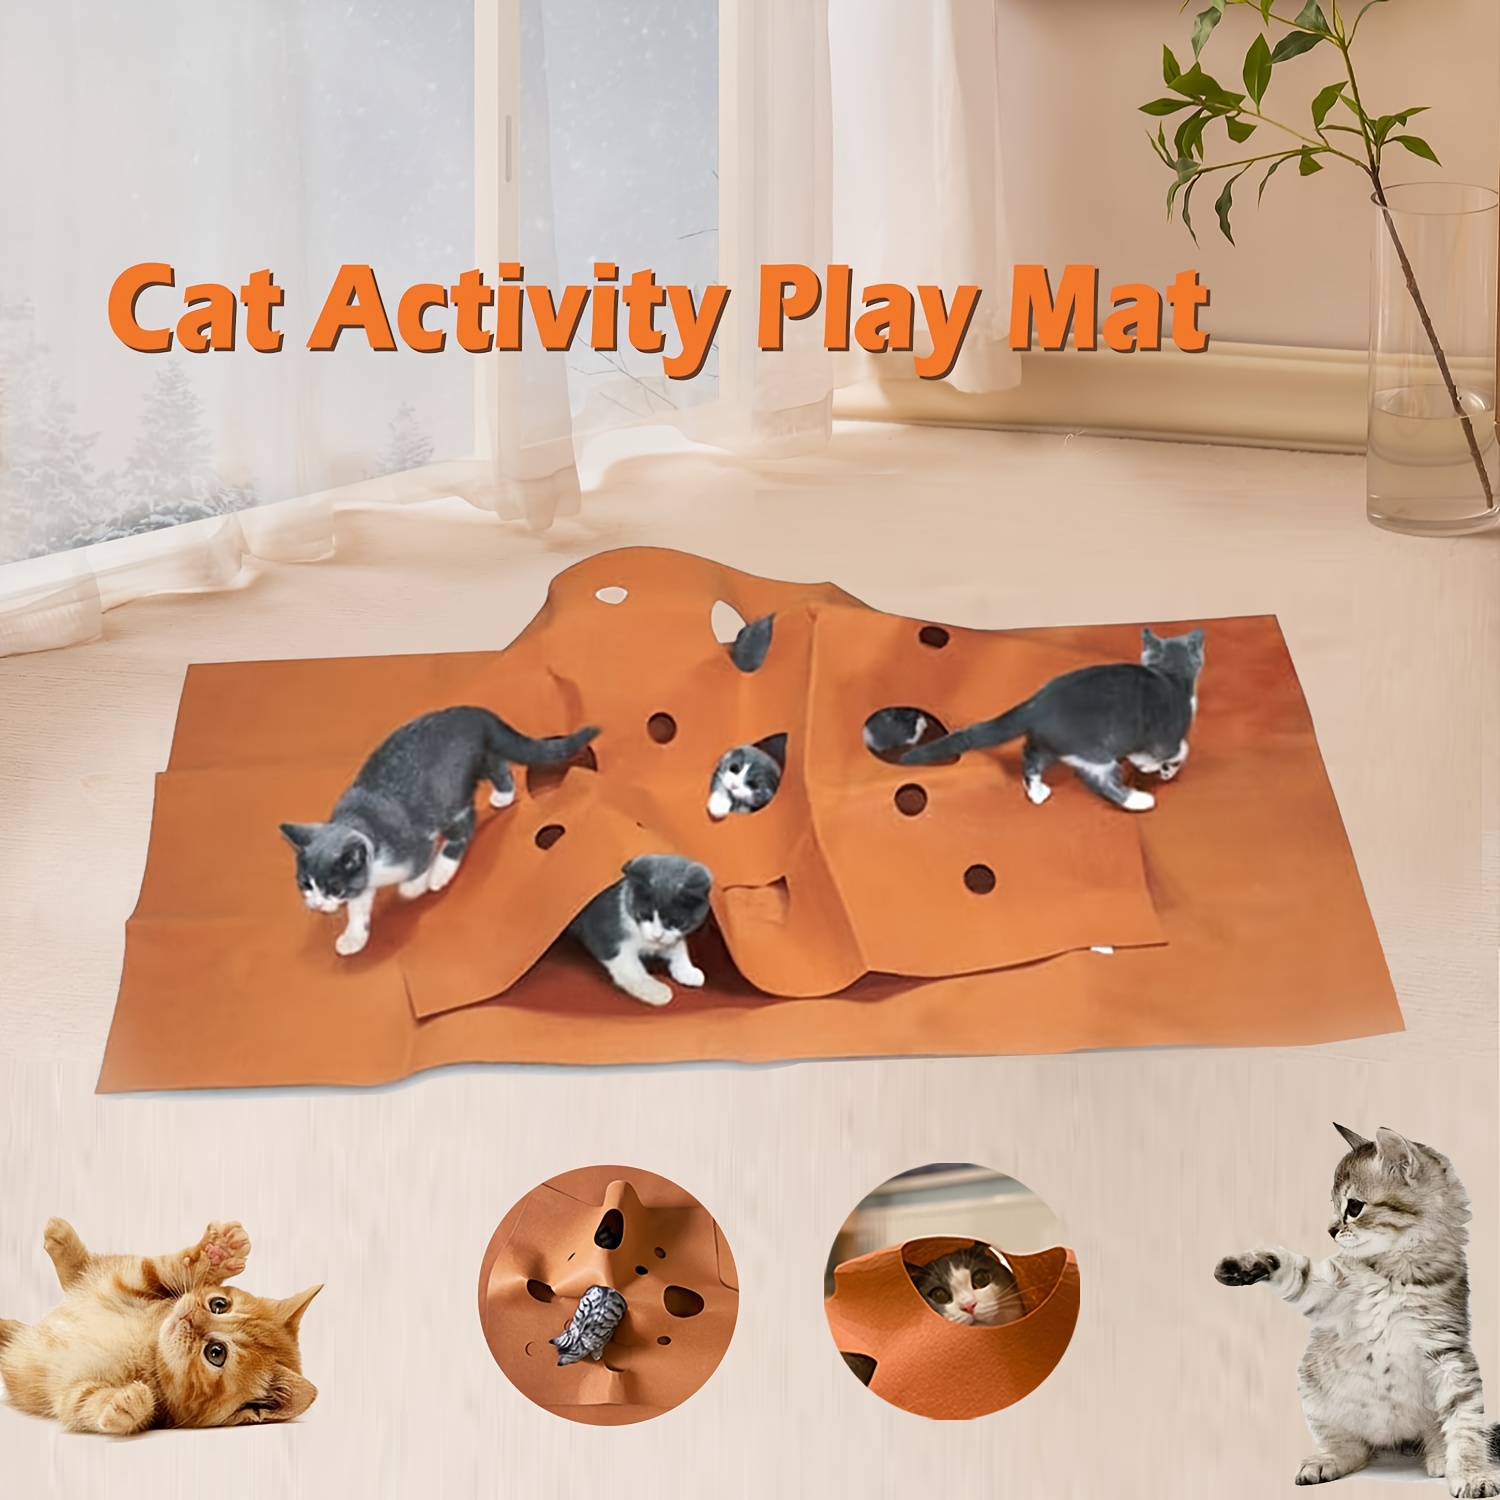 

1pc Cat Activity Play Mat, Pet Agility Training Pad With Biting And Scratching Features, Year-round Use With Warm Winter Cat Tunnel Toys, Durable Material